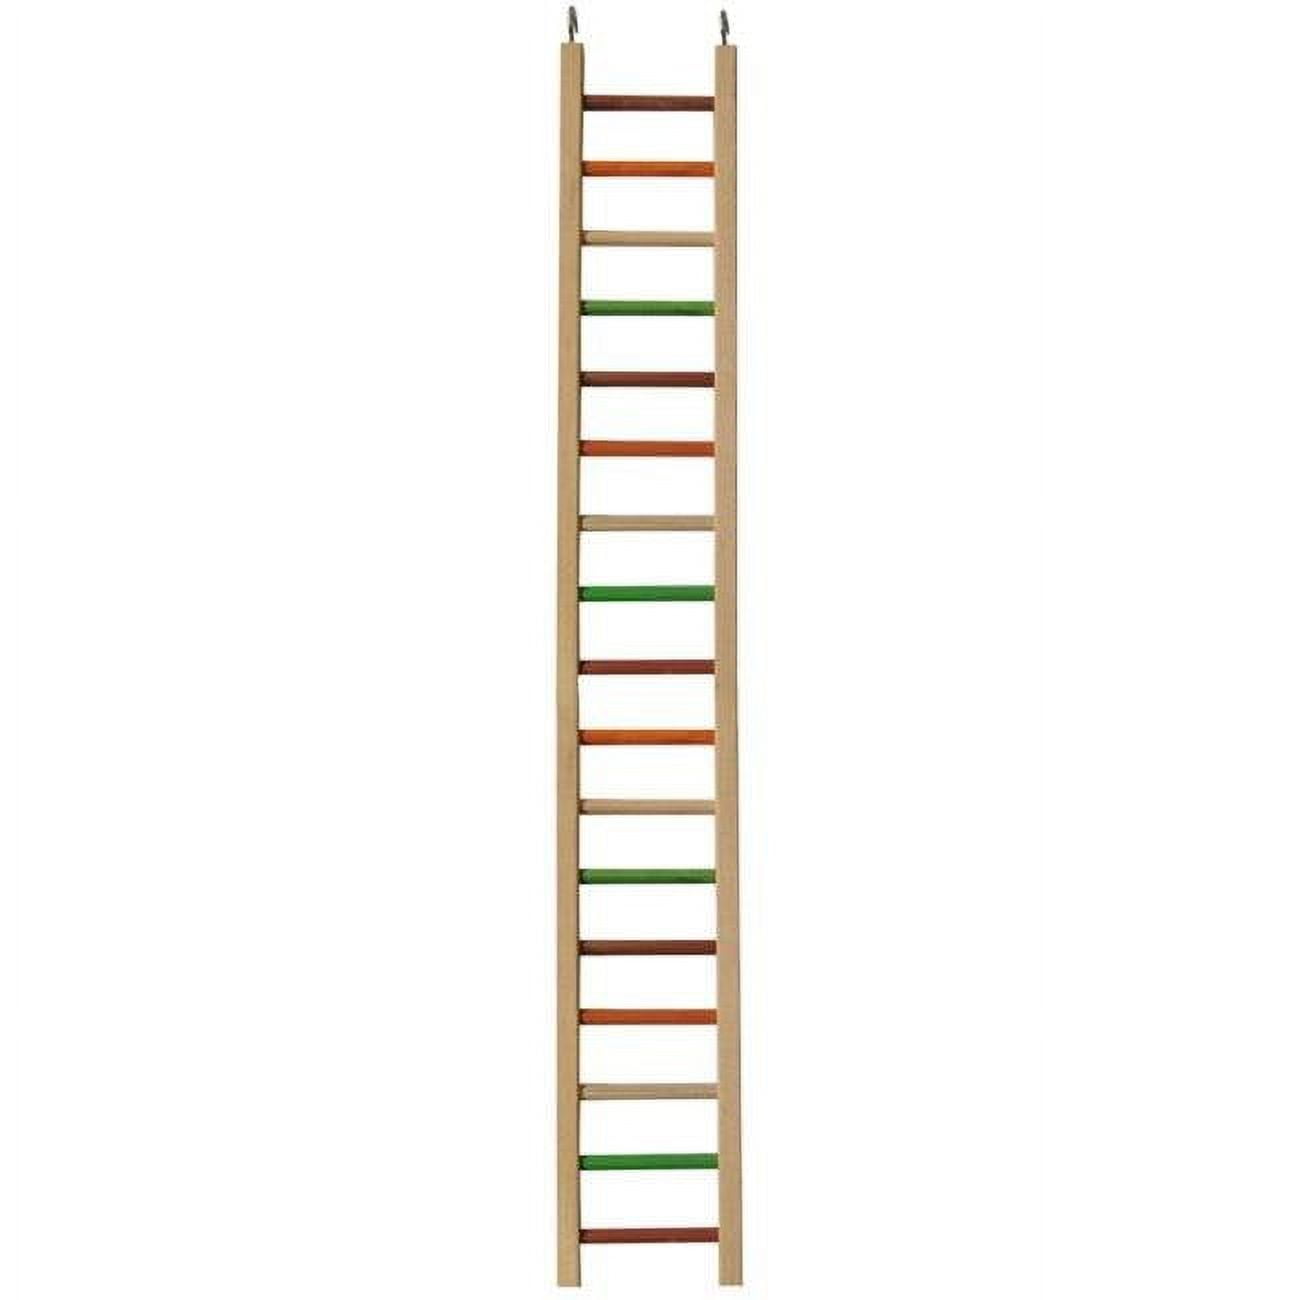 Hb46420 Wooden Hanging Ladder - 38 X 5.25 - 0.5 In.